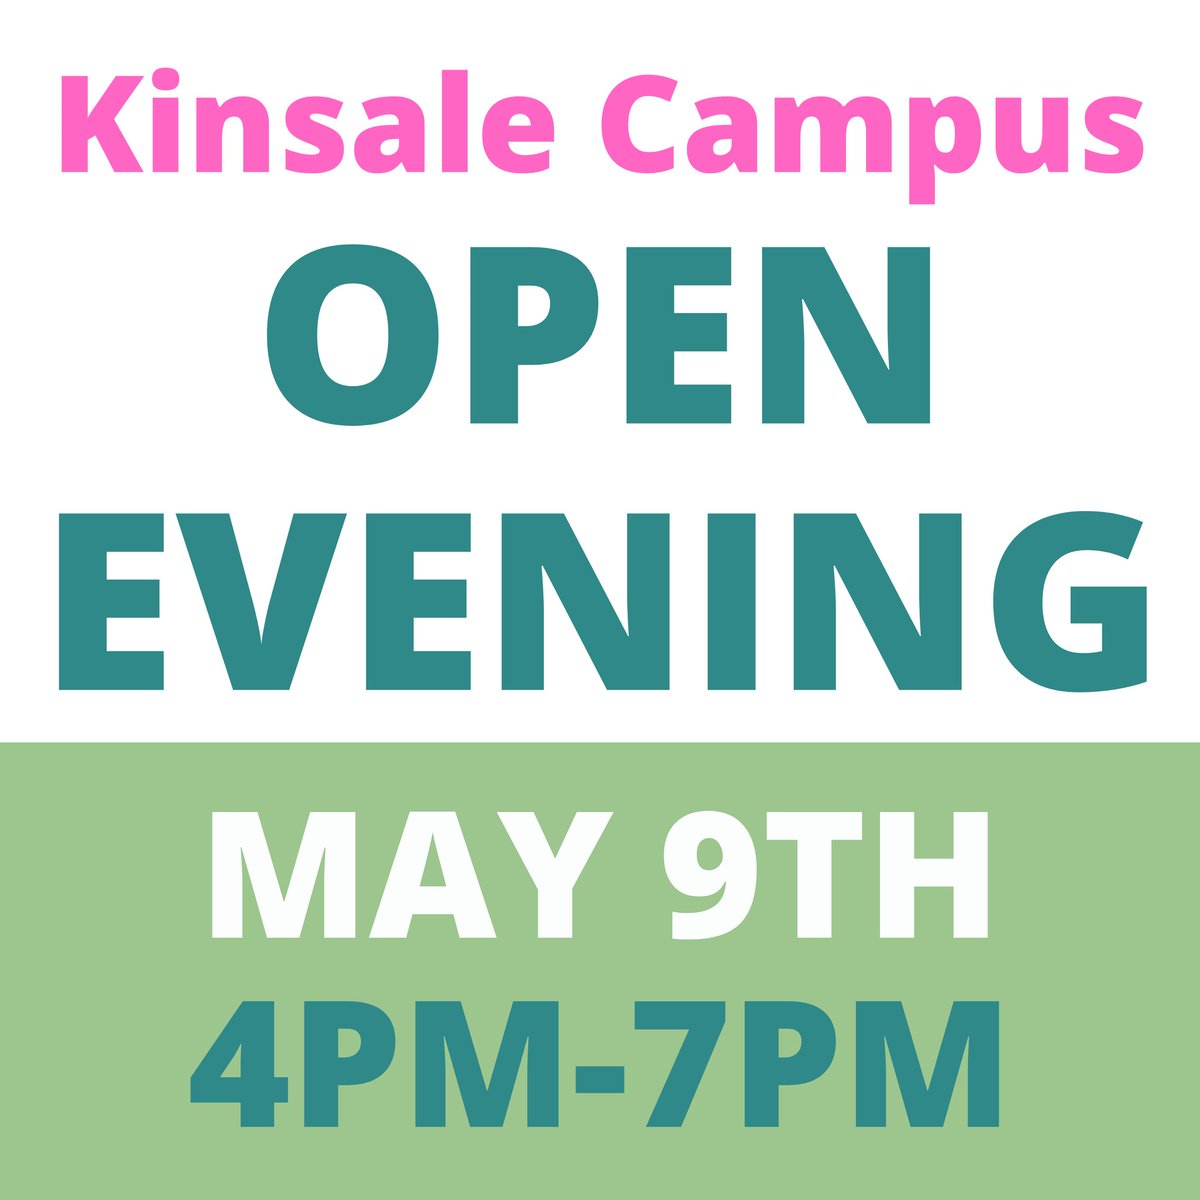 An opportunity this week to visit the campus after hours for our Open Evening from 4pm - 7pm. Discuss your course options with staff & explore funding/grant opportunities. Applications open via kinsalecampus.ie #CETB #ccfet #kinsalecampus #kinsale #courses #thisisFET #FET